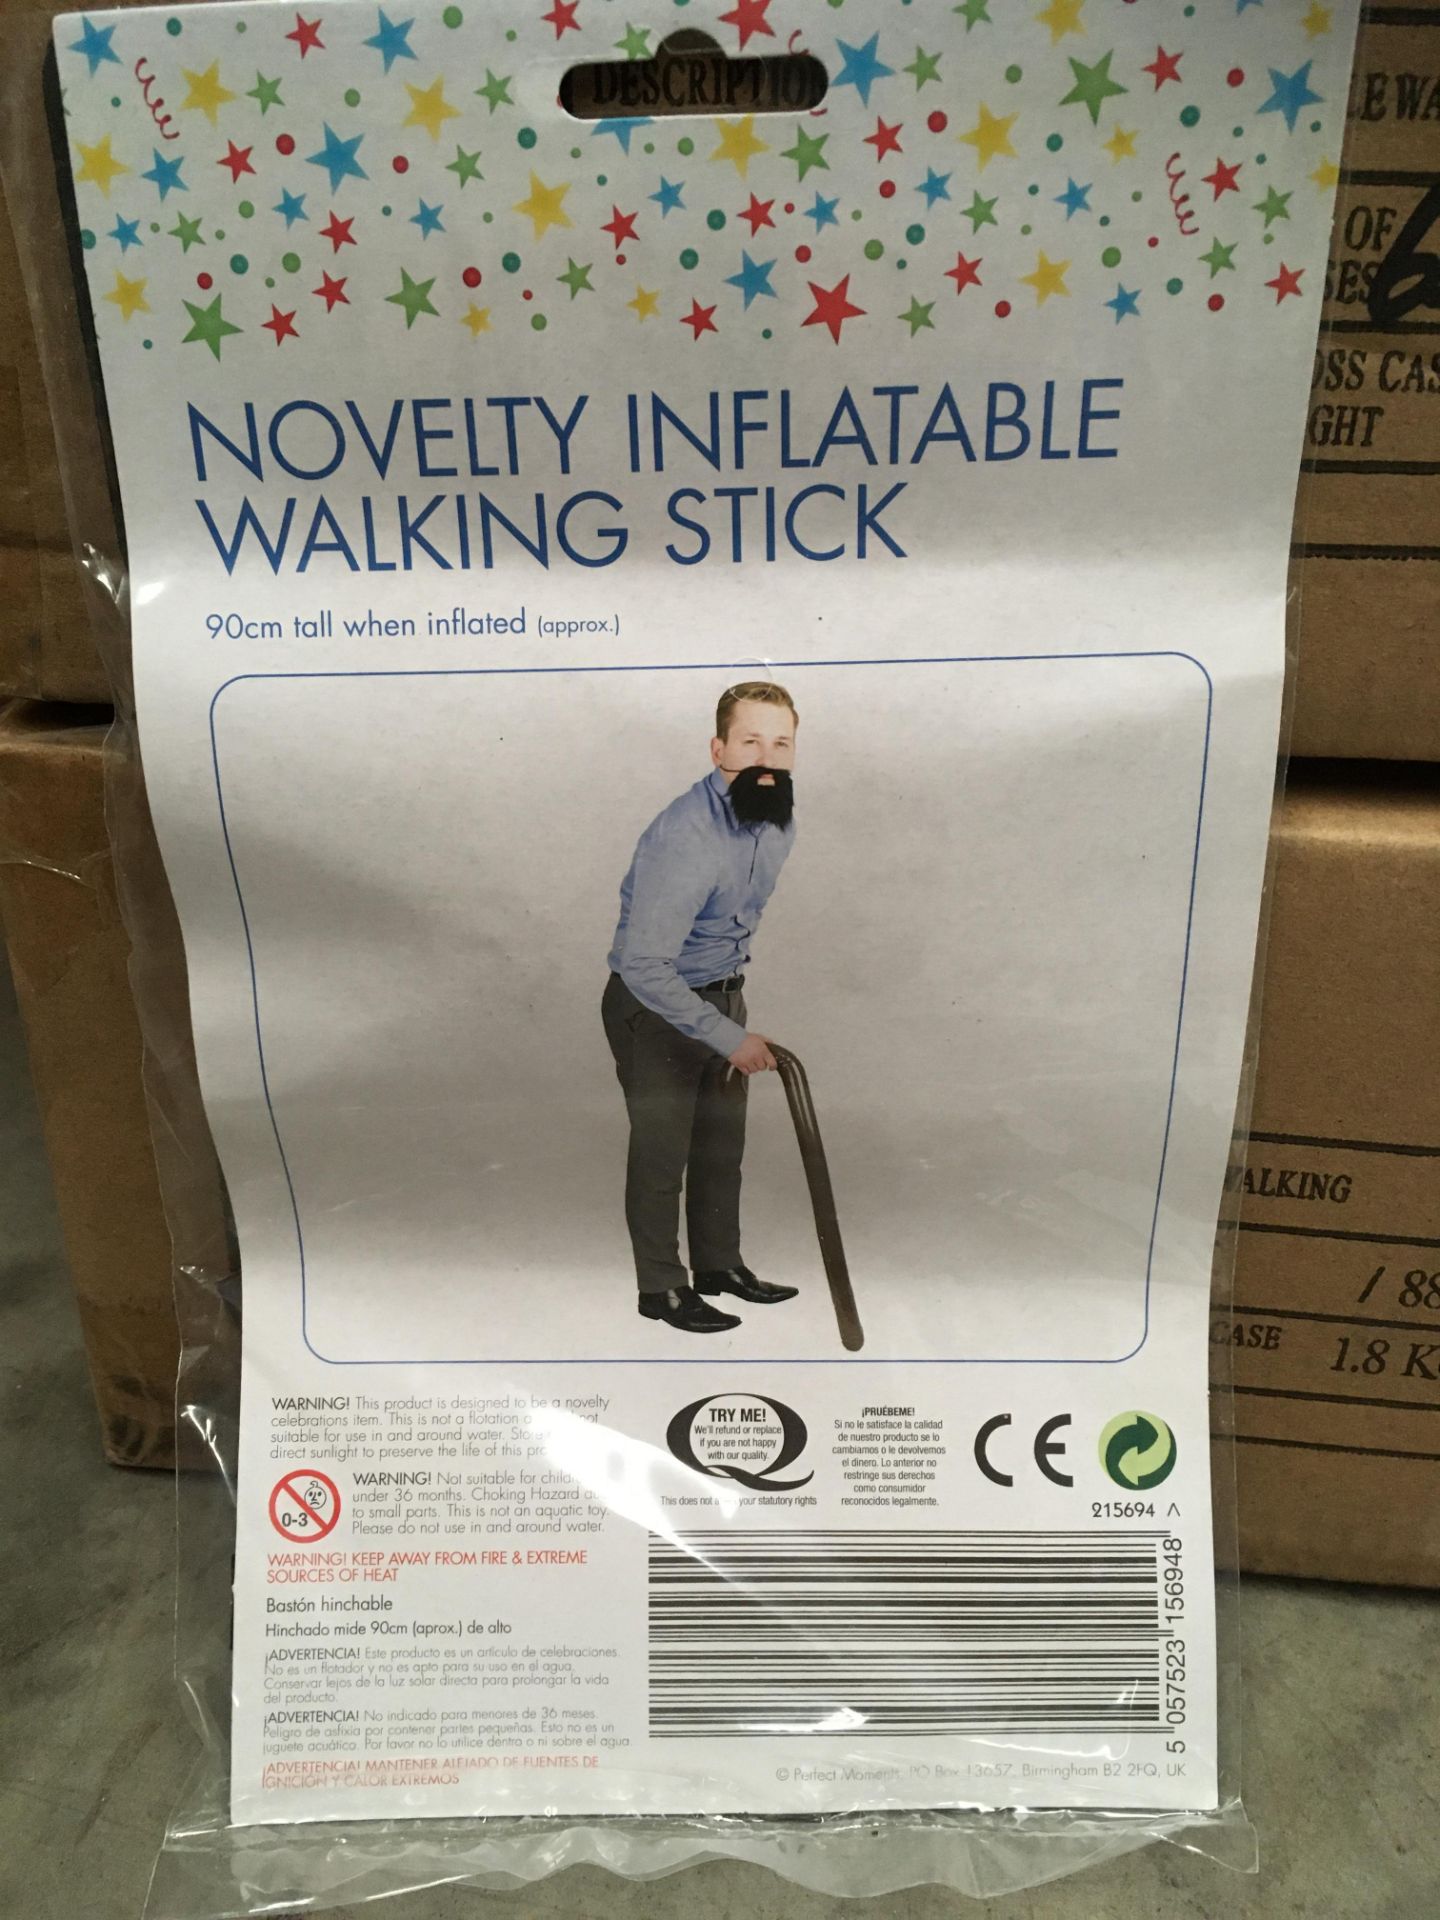 120 x novelty inflatable walking sticks 90cm tall (5 x boxes)